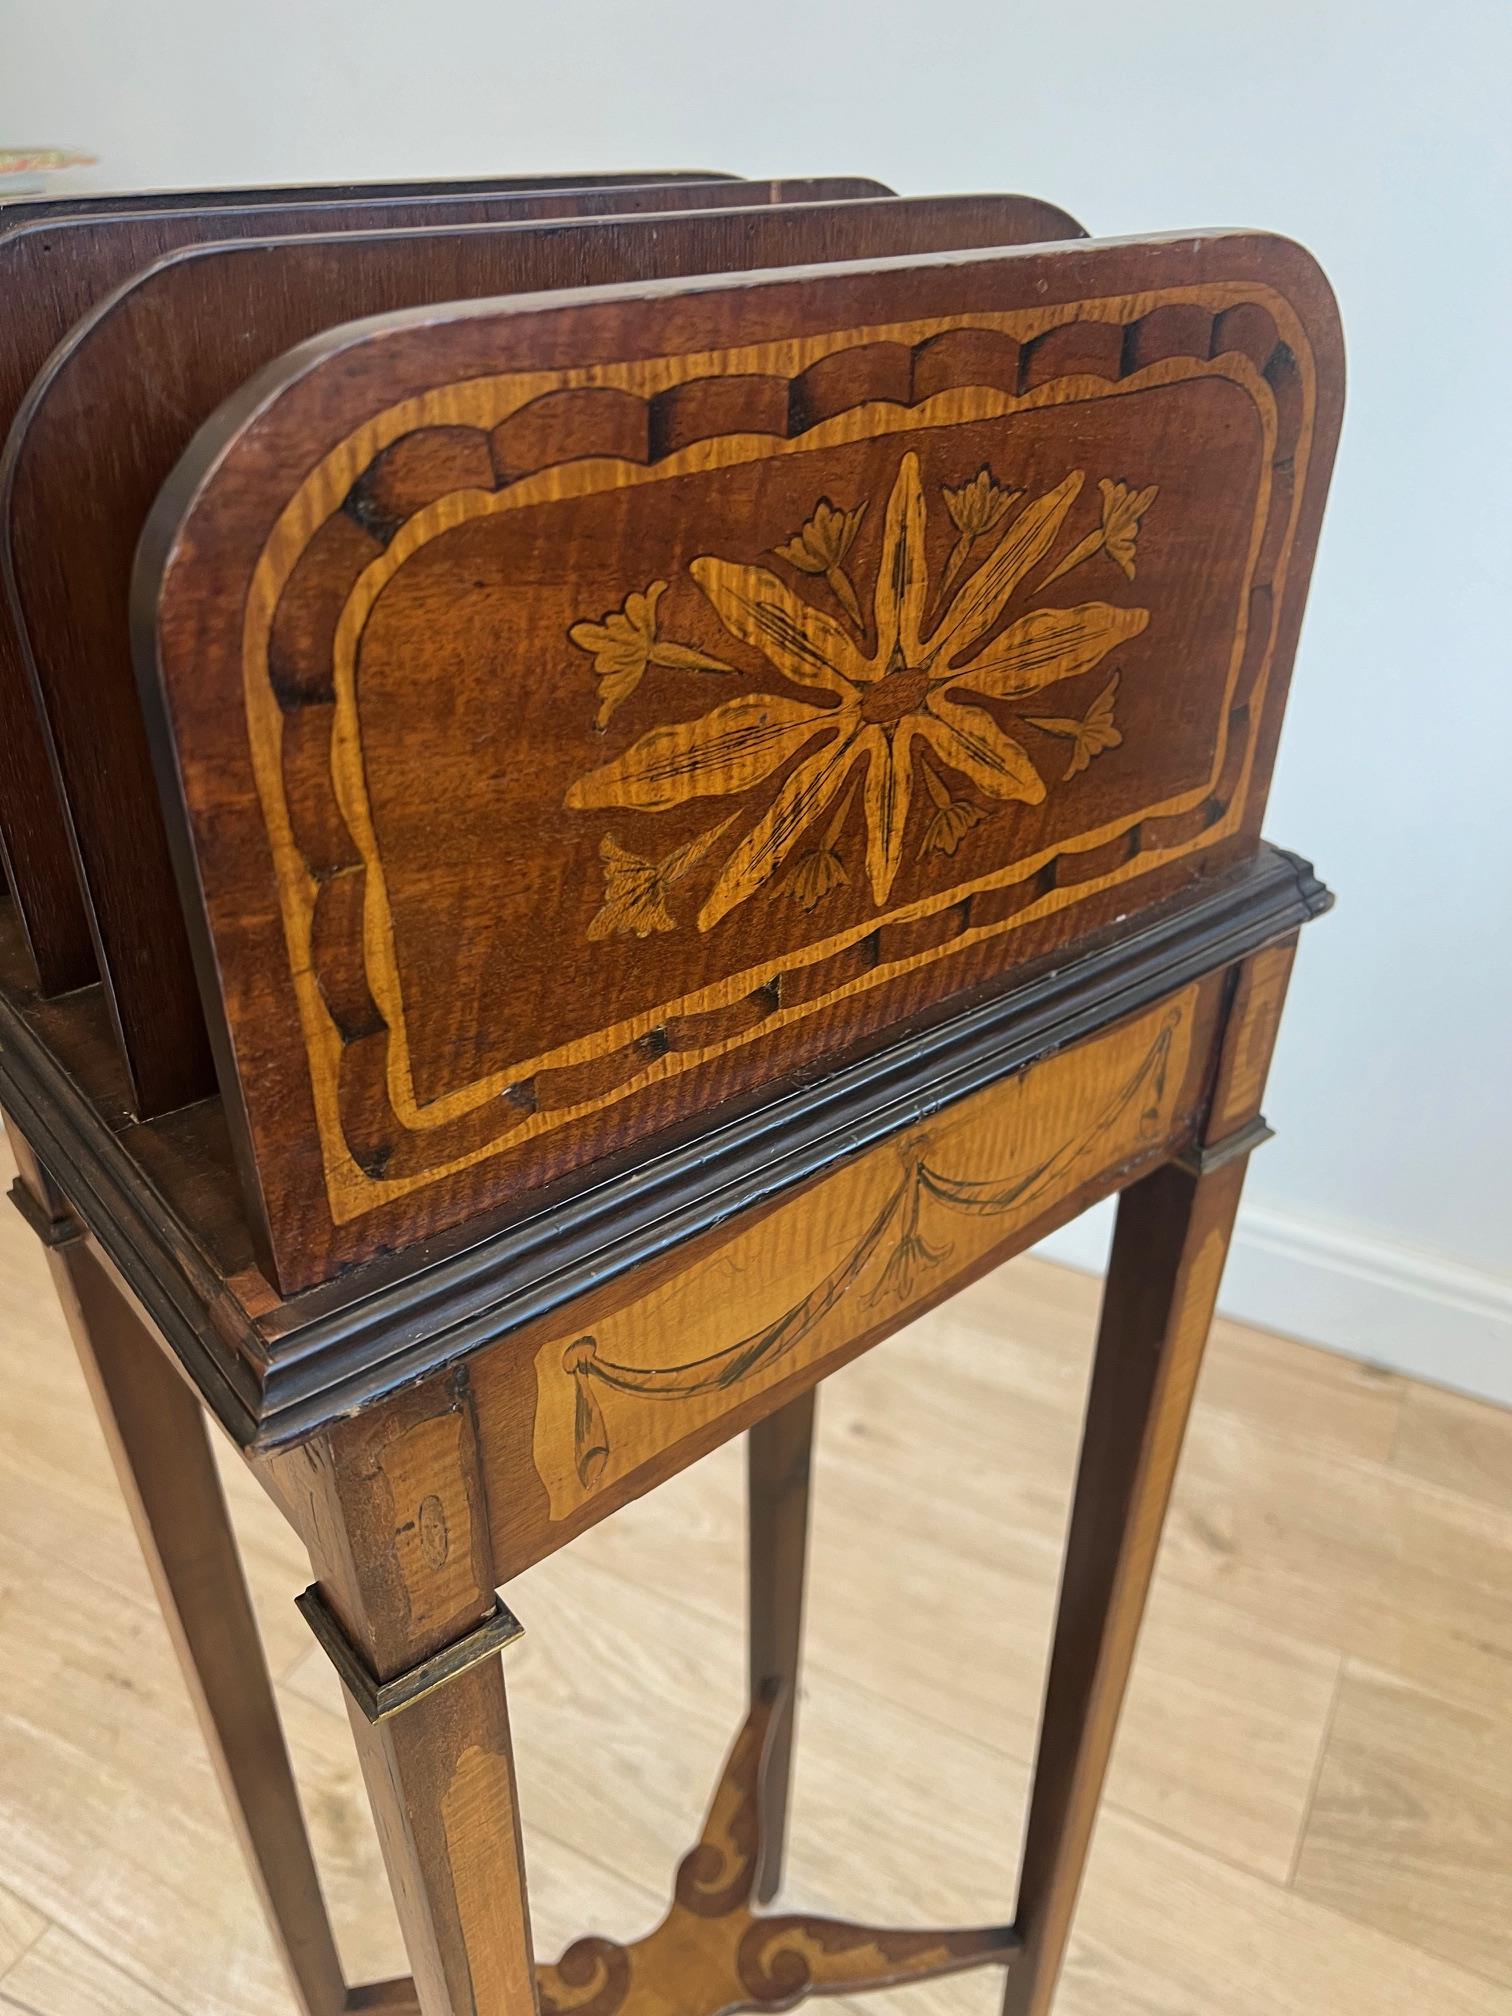 A LATE 19TH CENTURY SHERATON REVIVAL MARQUETRY LETTER HOLDER - Image 3 of 5